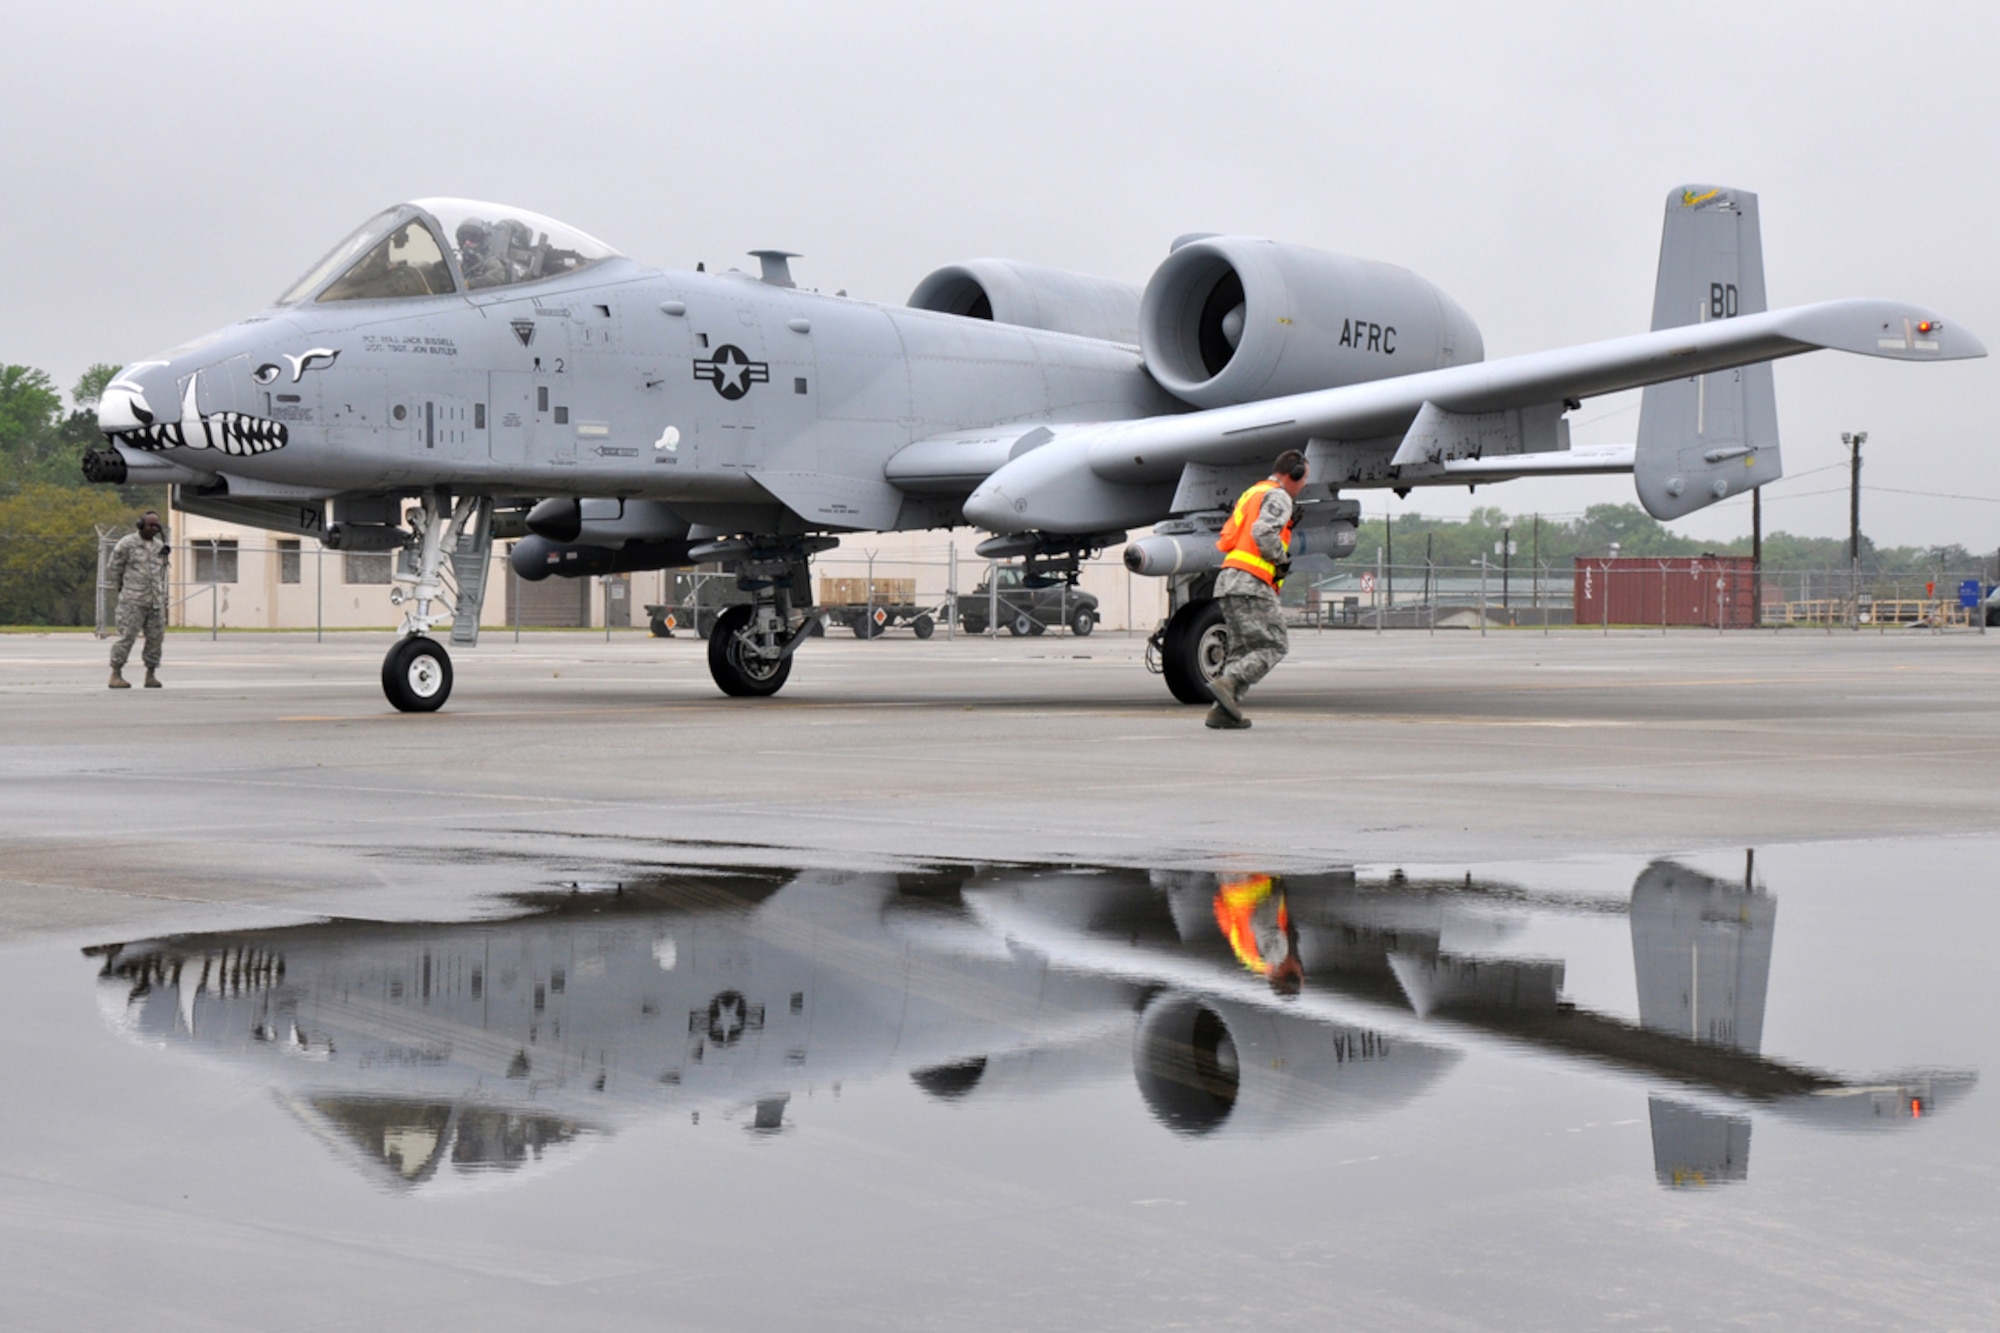 Airmen from the 917th Wing at Barksdale Air Force Base, La., prepare an A-10 Thunderbolt for takeoff at the Savannah Combat Readiness Training Center in Savannah, Ga., April 2, 2009. Airmen from the 917th WG and the 47th Fighter Squadron both from Barksdale are involved in training Joint Terminal Attack Controllers for 13 days during “Patriot Dixie.” (US Air Force photo/Tech. Sgt. Jeff Walston)